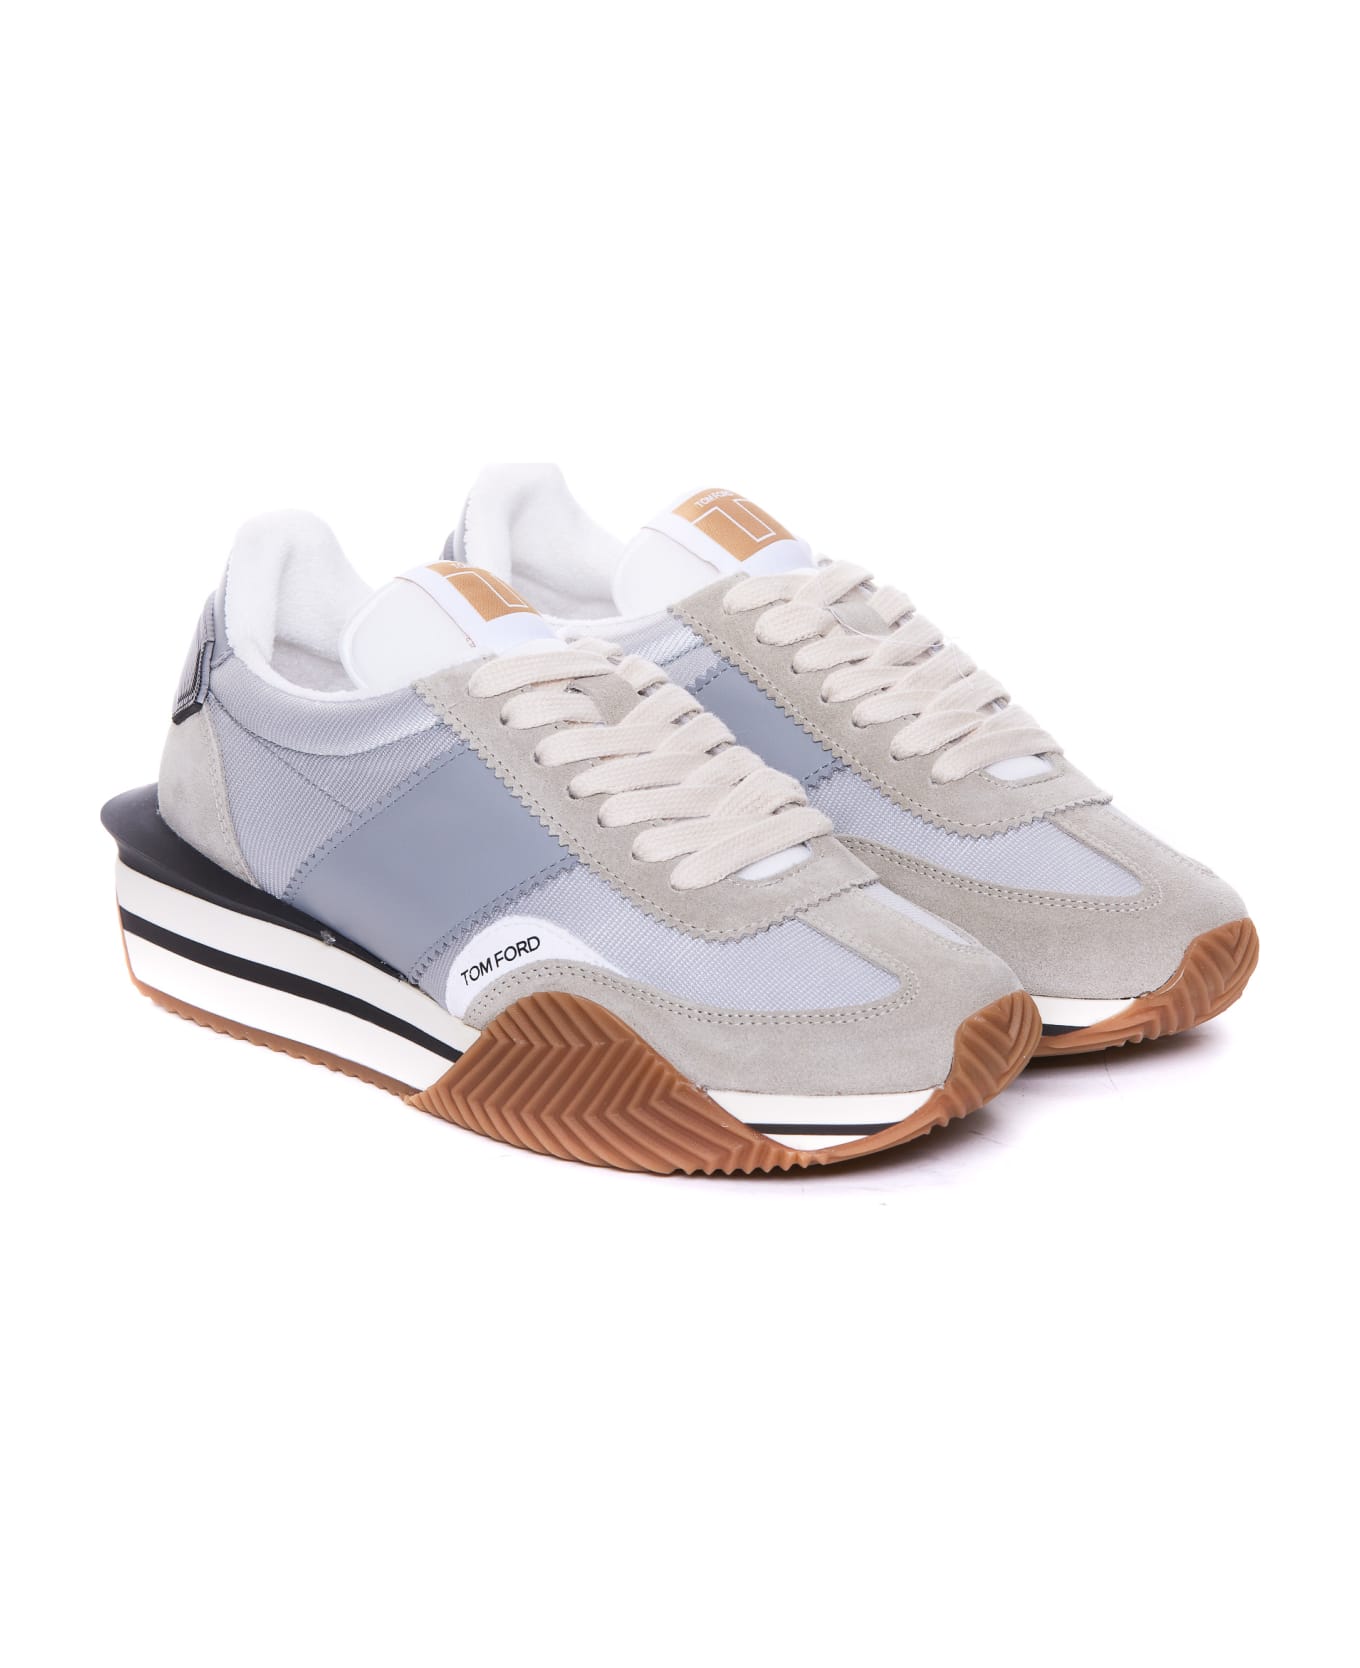 Tom Ford James Sneakers - Silver スニーカー